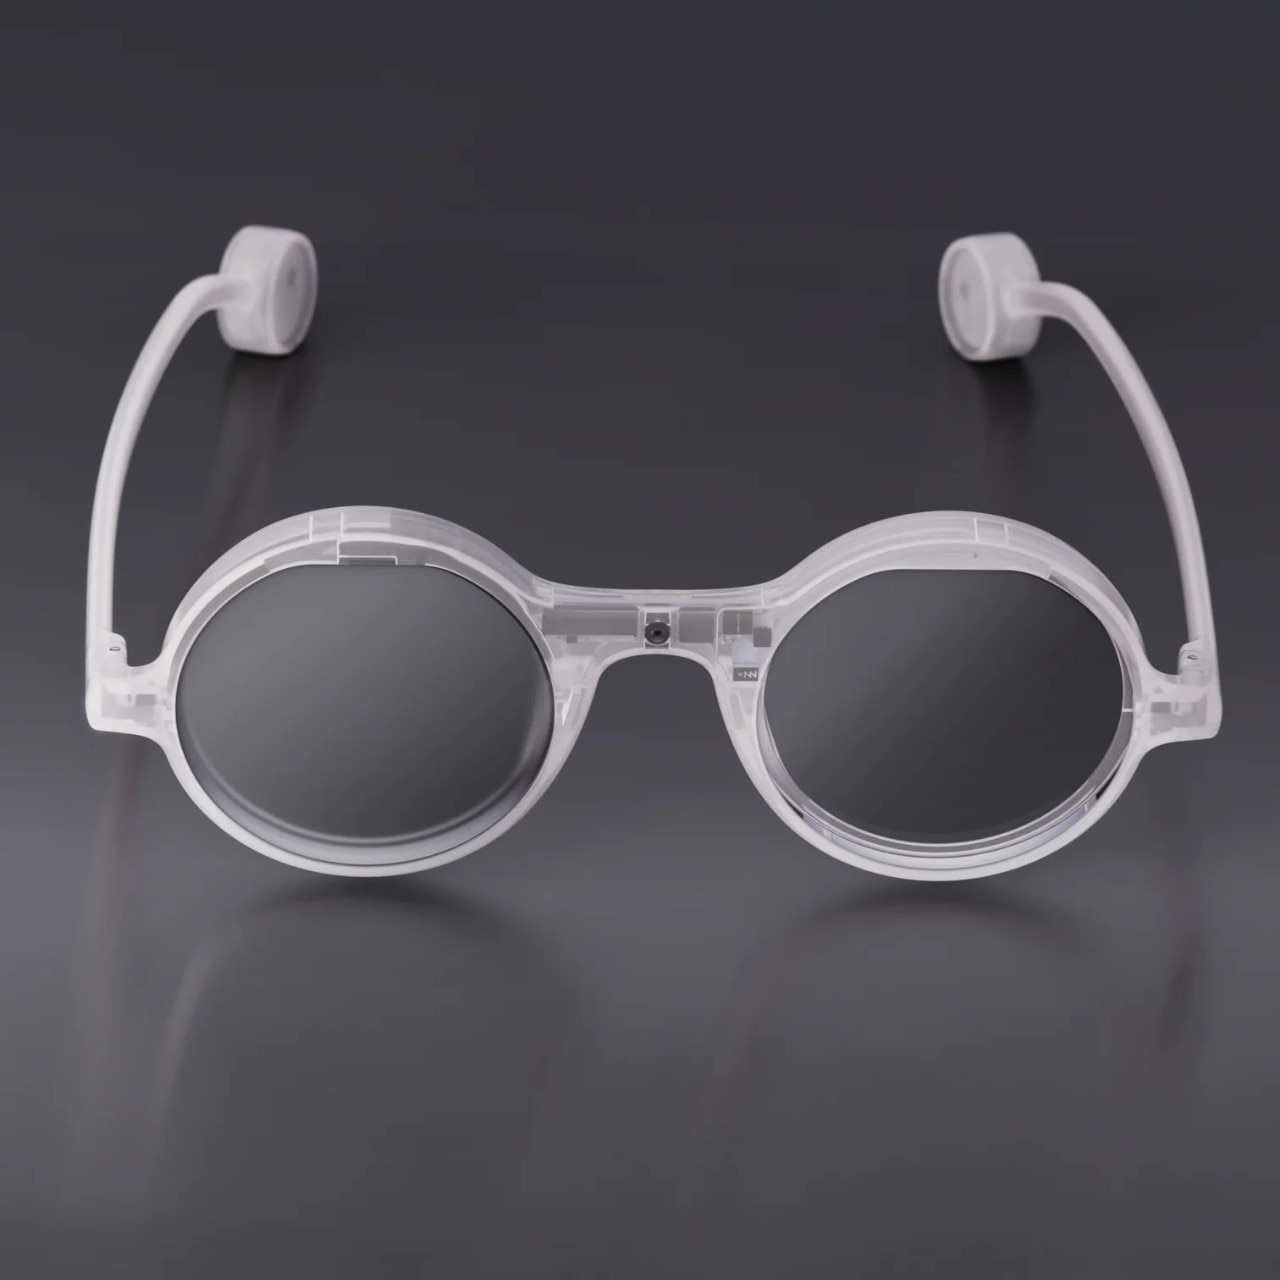 These glasses put AI in front of your eyes - Domus